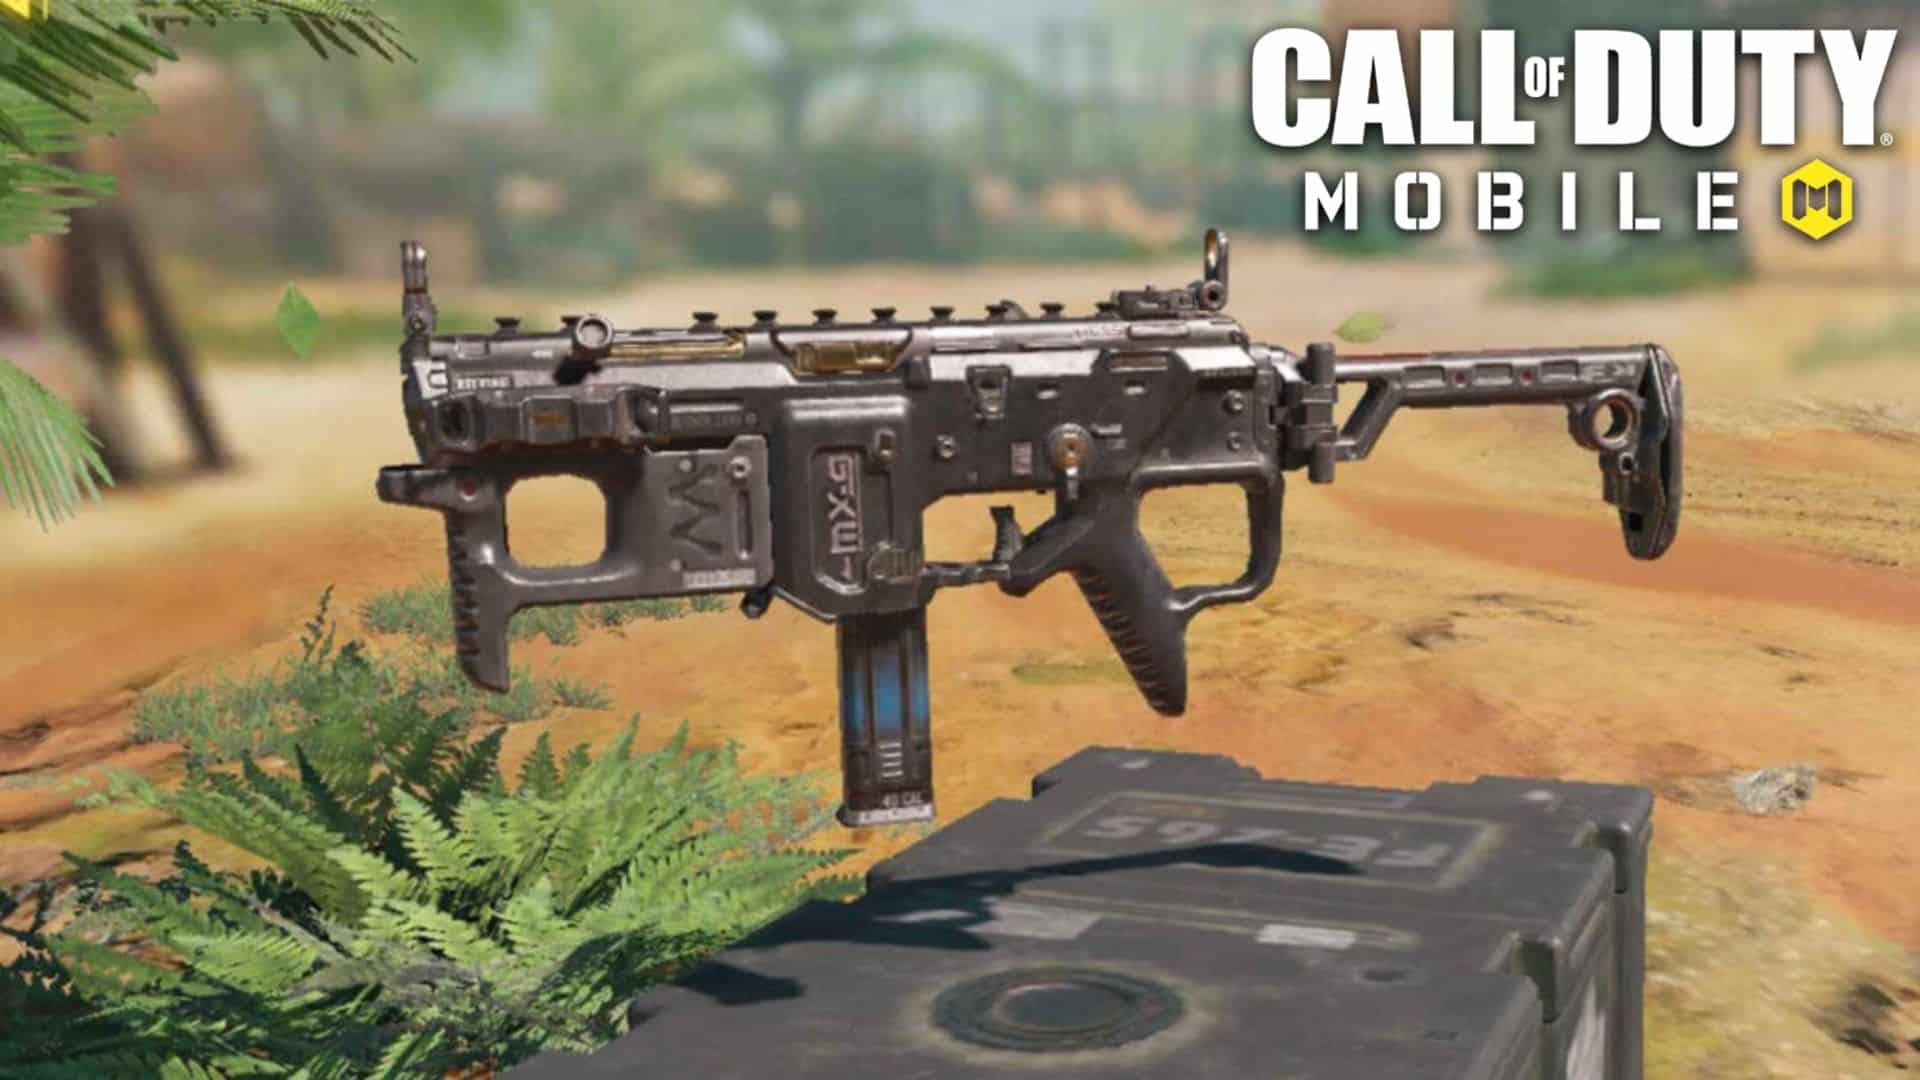 How to download Call of Duty Mobile – maps, modes, weapons, more - Dexerto